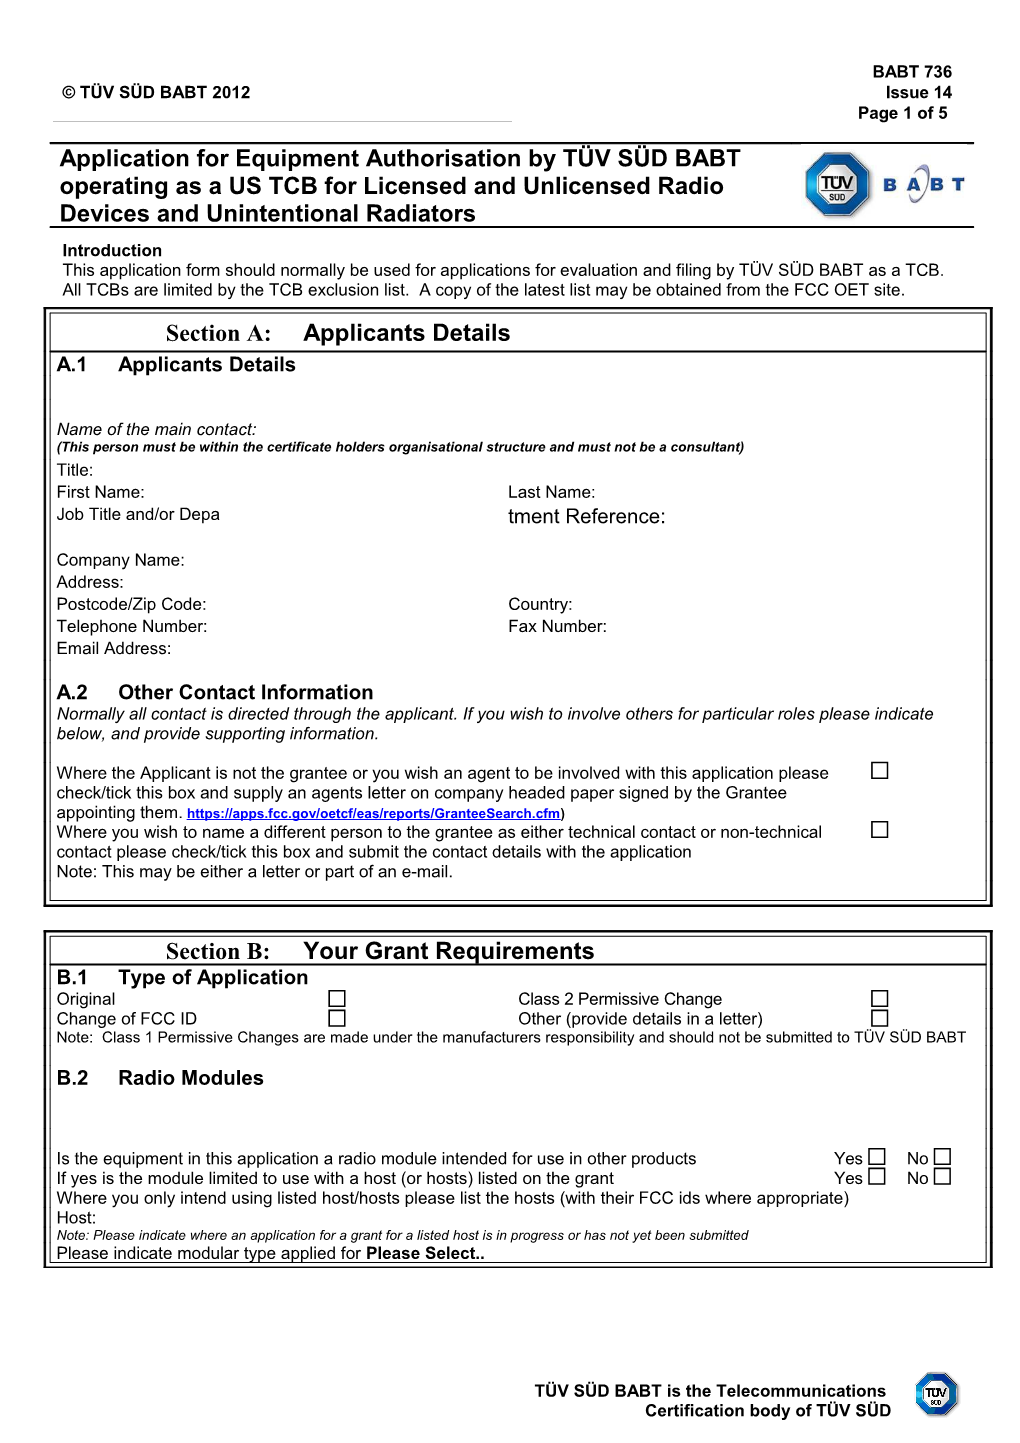 Application for Equipment Authorisation by TÜV SÜD BABT Operating As a US TCB for Licensed